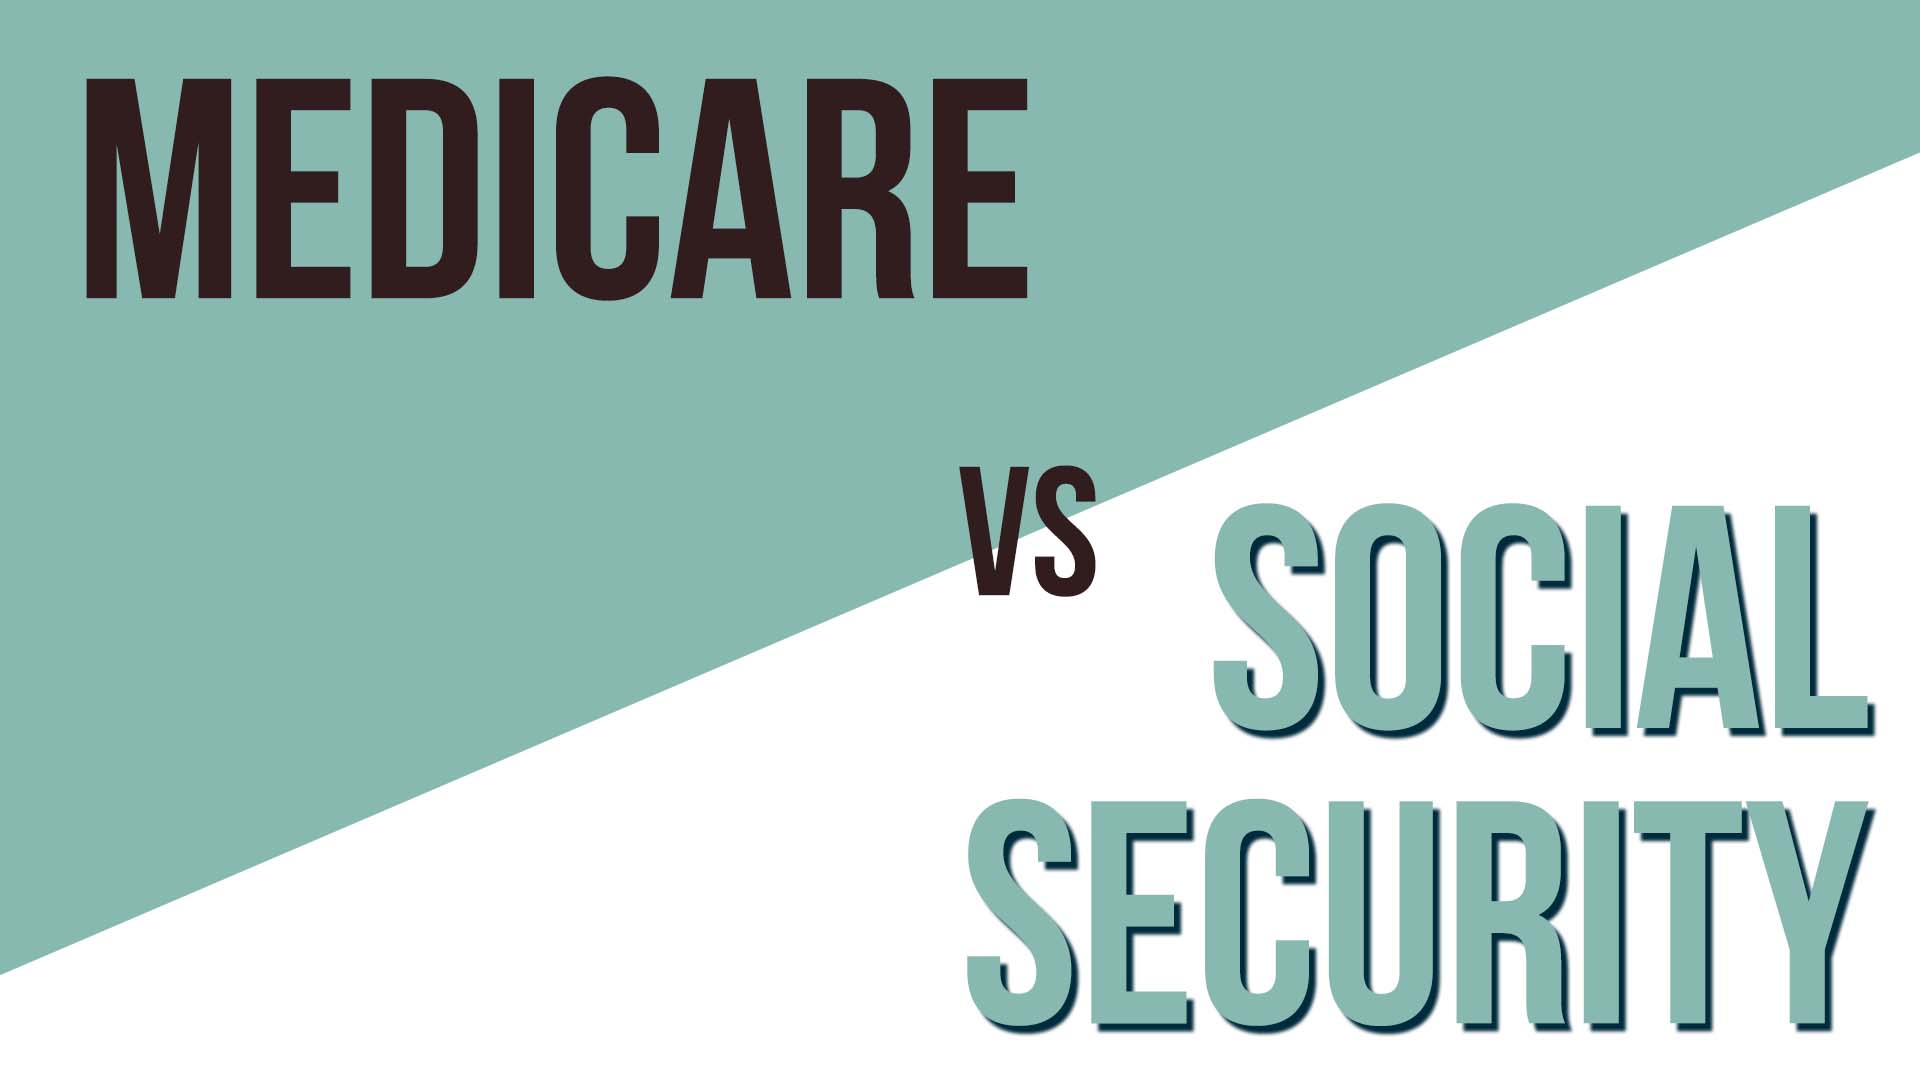 A graphic illustrating medicare vs social security.